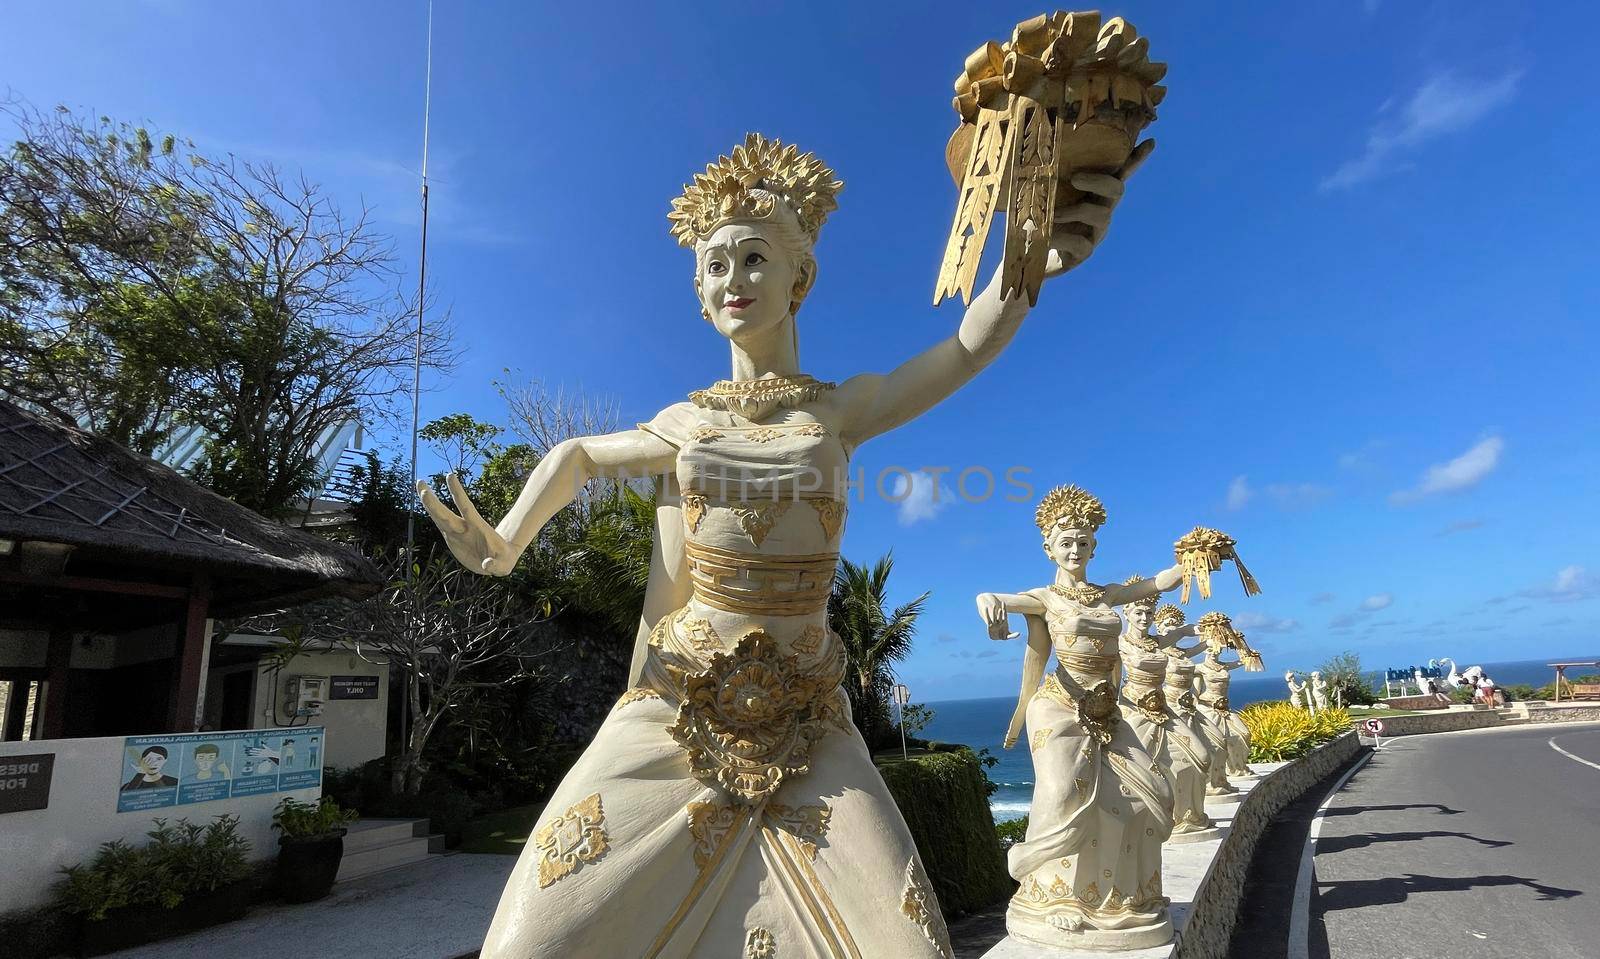 Bali, Indonesia - 06 July 2022: Sculpture of Balinese dancers at the entrance to Pantai Melasti Beach under the blue sky